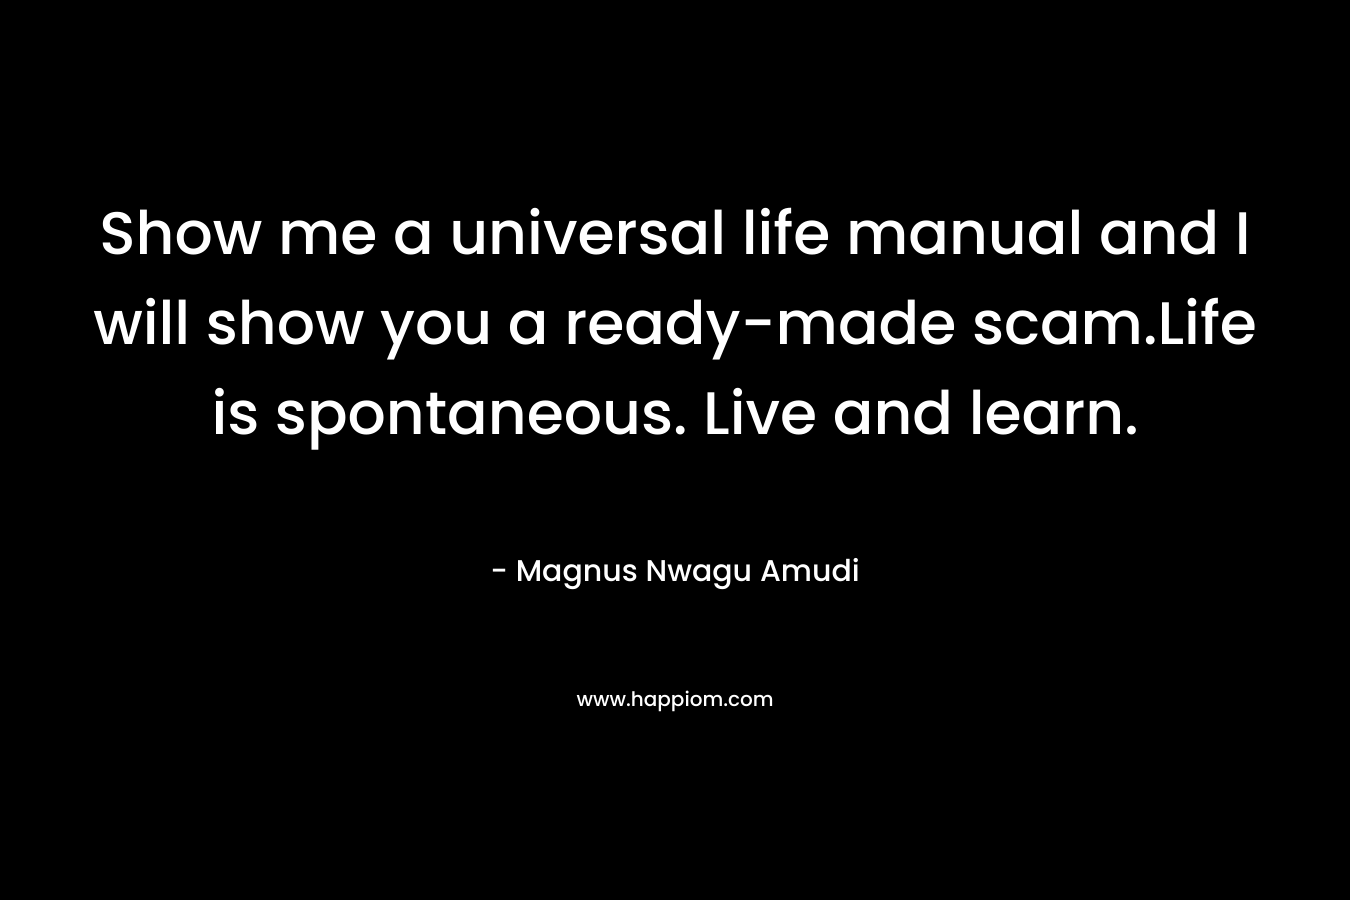 Show me a universal life manual and I will show you a ready-made scam.Life is spontaneous. Live and learn.